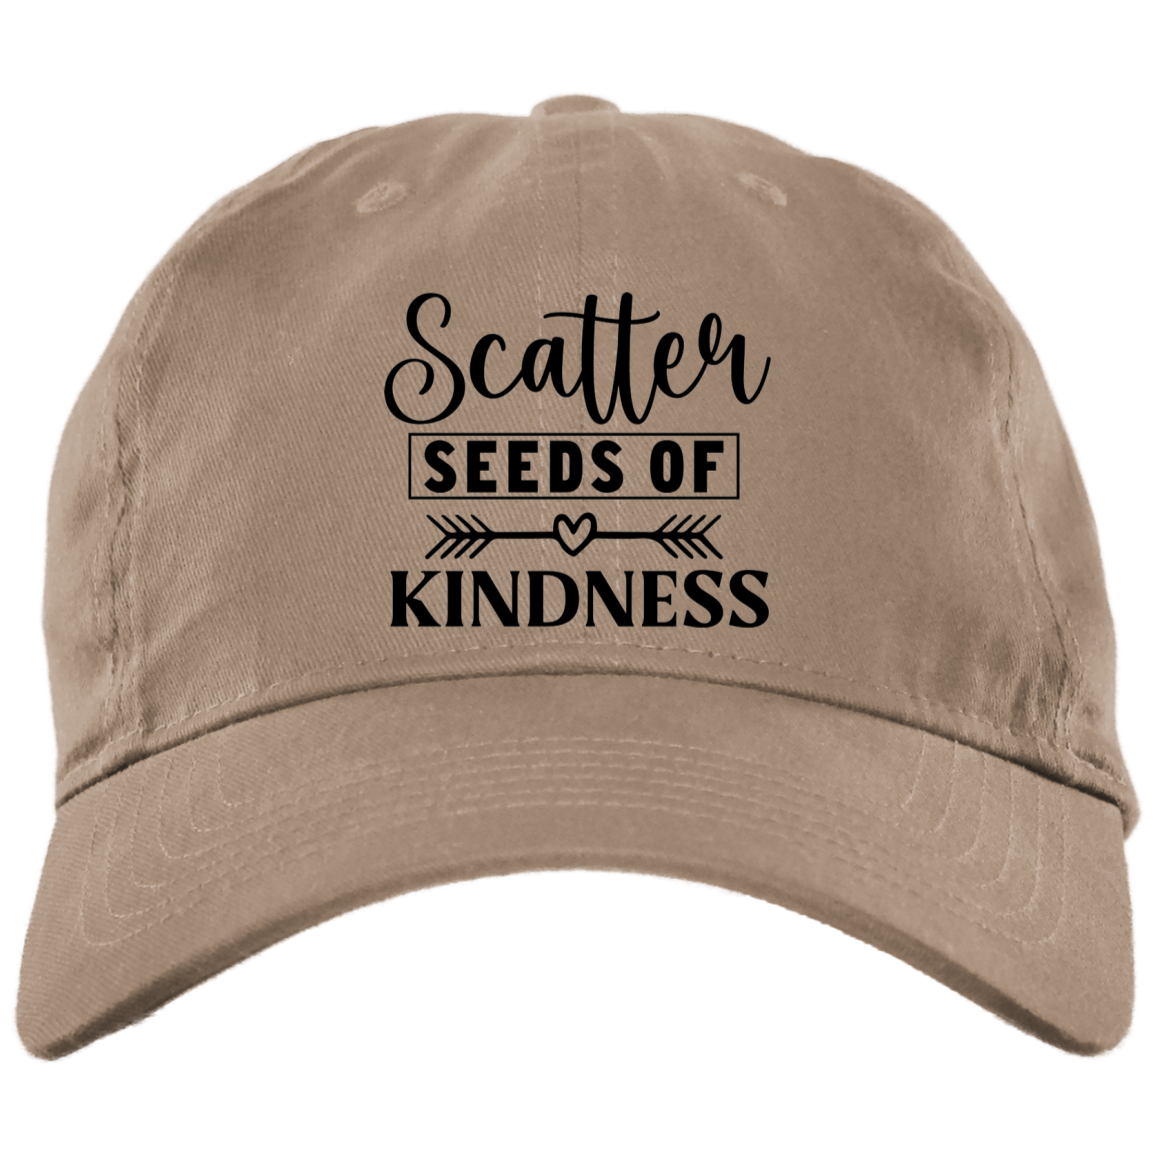 Scatter Seeds of Kindness Embroidered Brushed Twill Unstructured Dad Cap